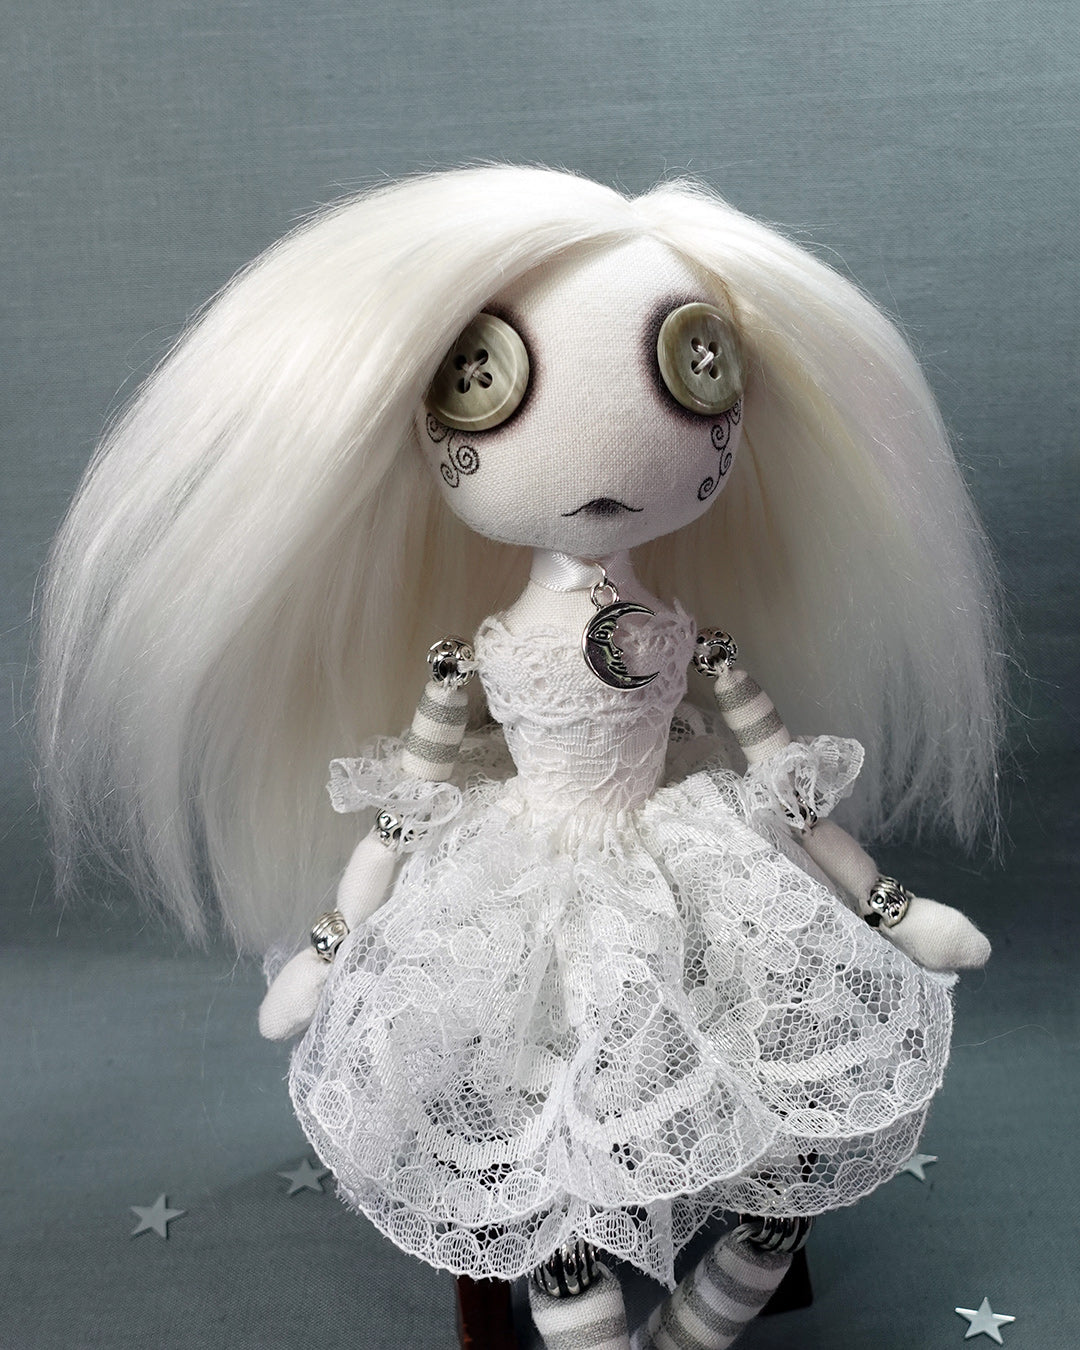 a white cloth ghost doll with grey button eyes, moon necklace and white lace dress